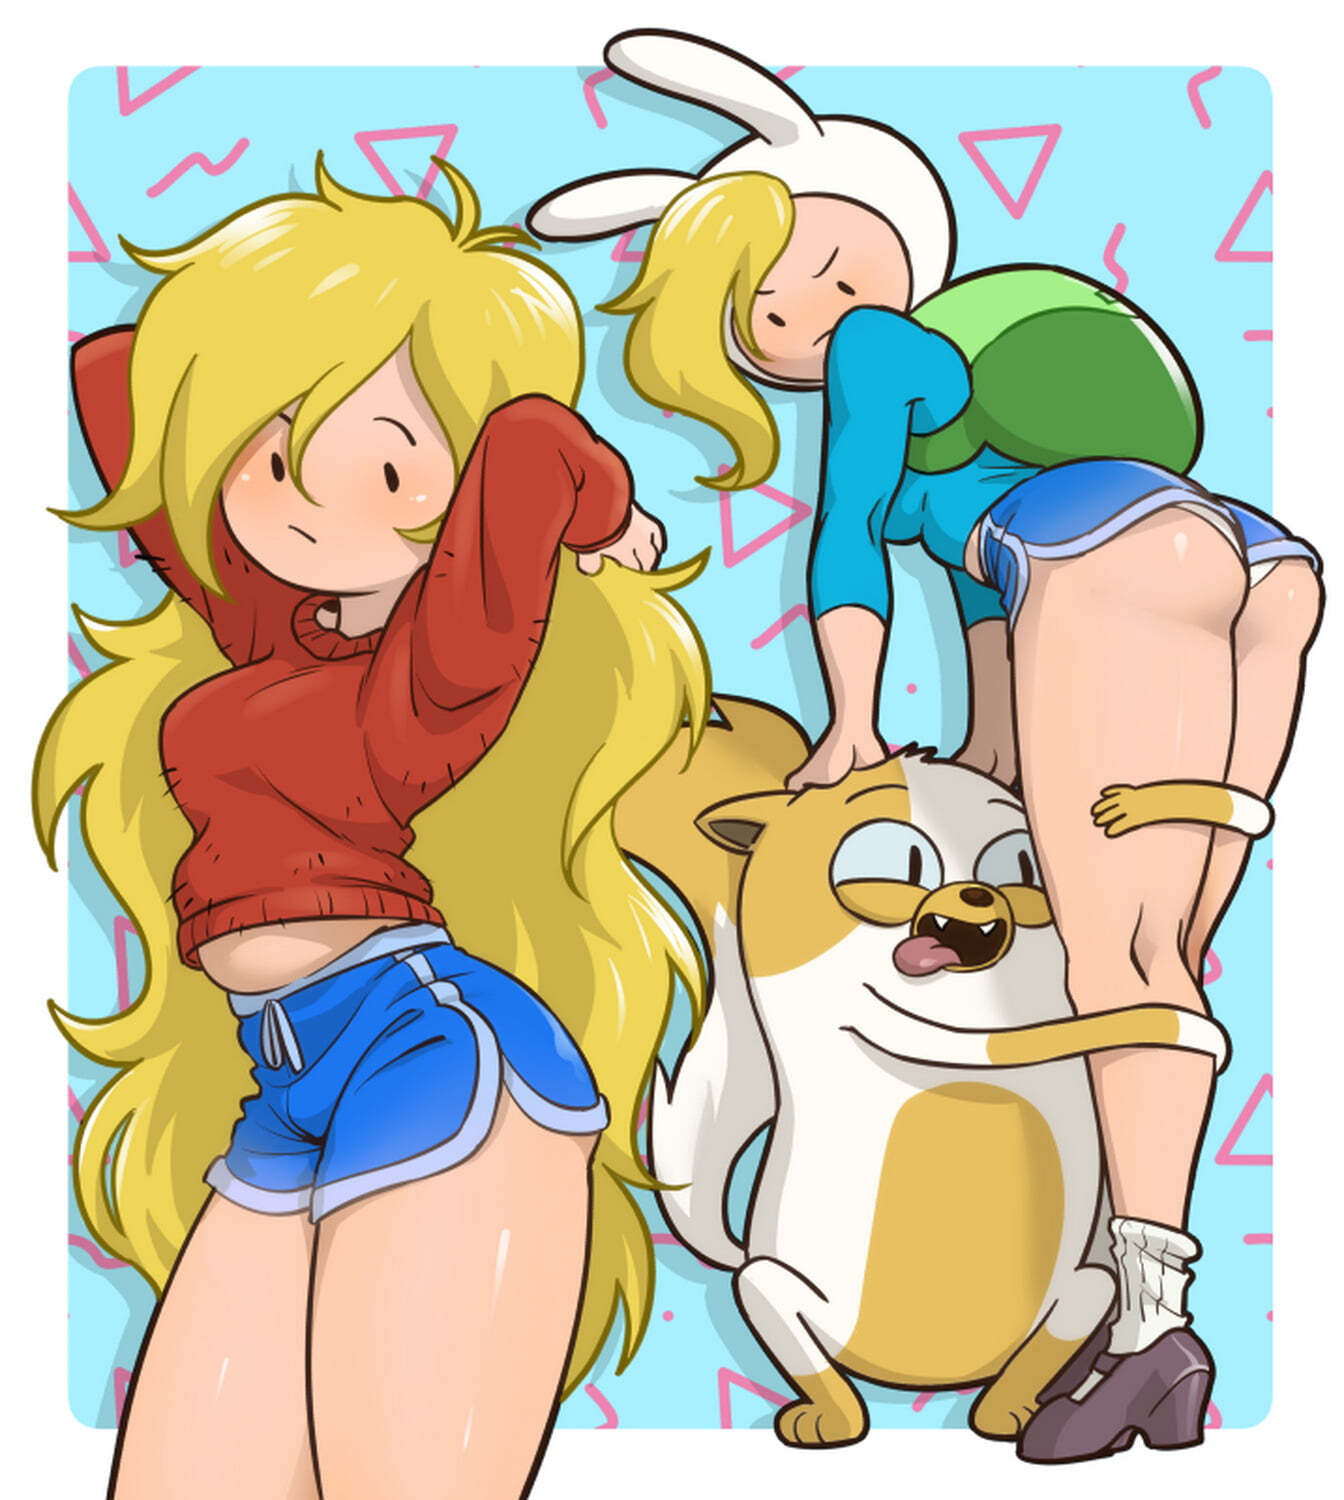 Cake The Cat and Fionna The Human Girl Blonde Thicc < Your Cartoon Porn